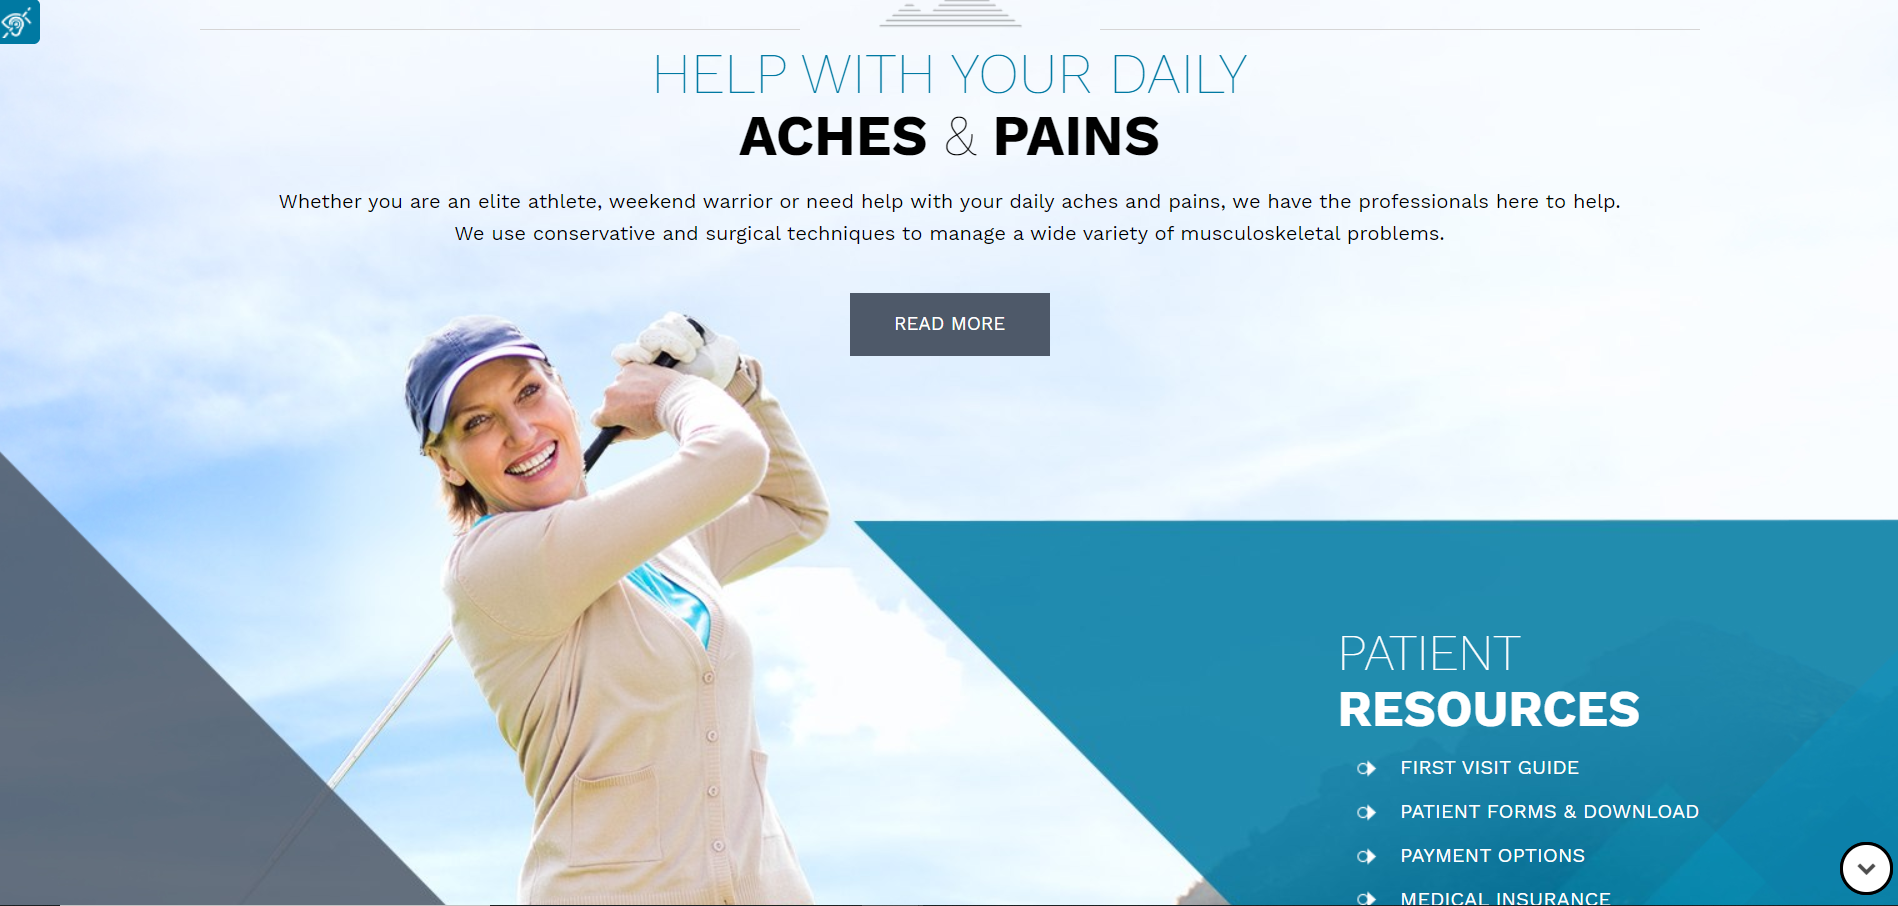 Another screenshot of the Arizona Orthopedic and Fracture Surgeon website depicting a woman playing golf. The graphics on this page have sharp edges.